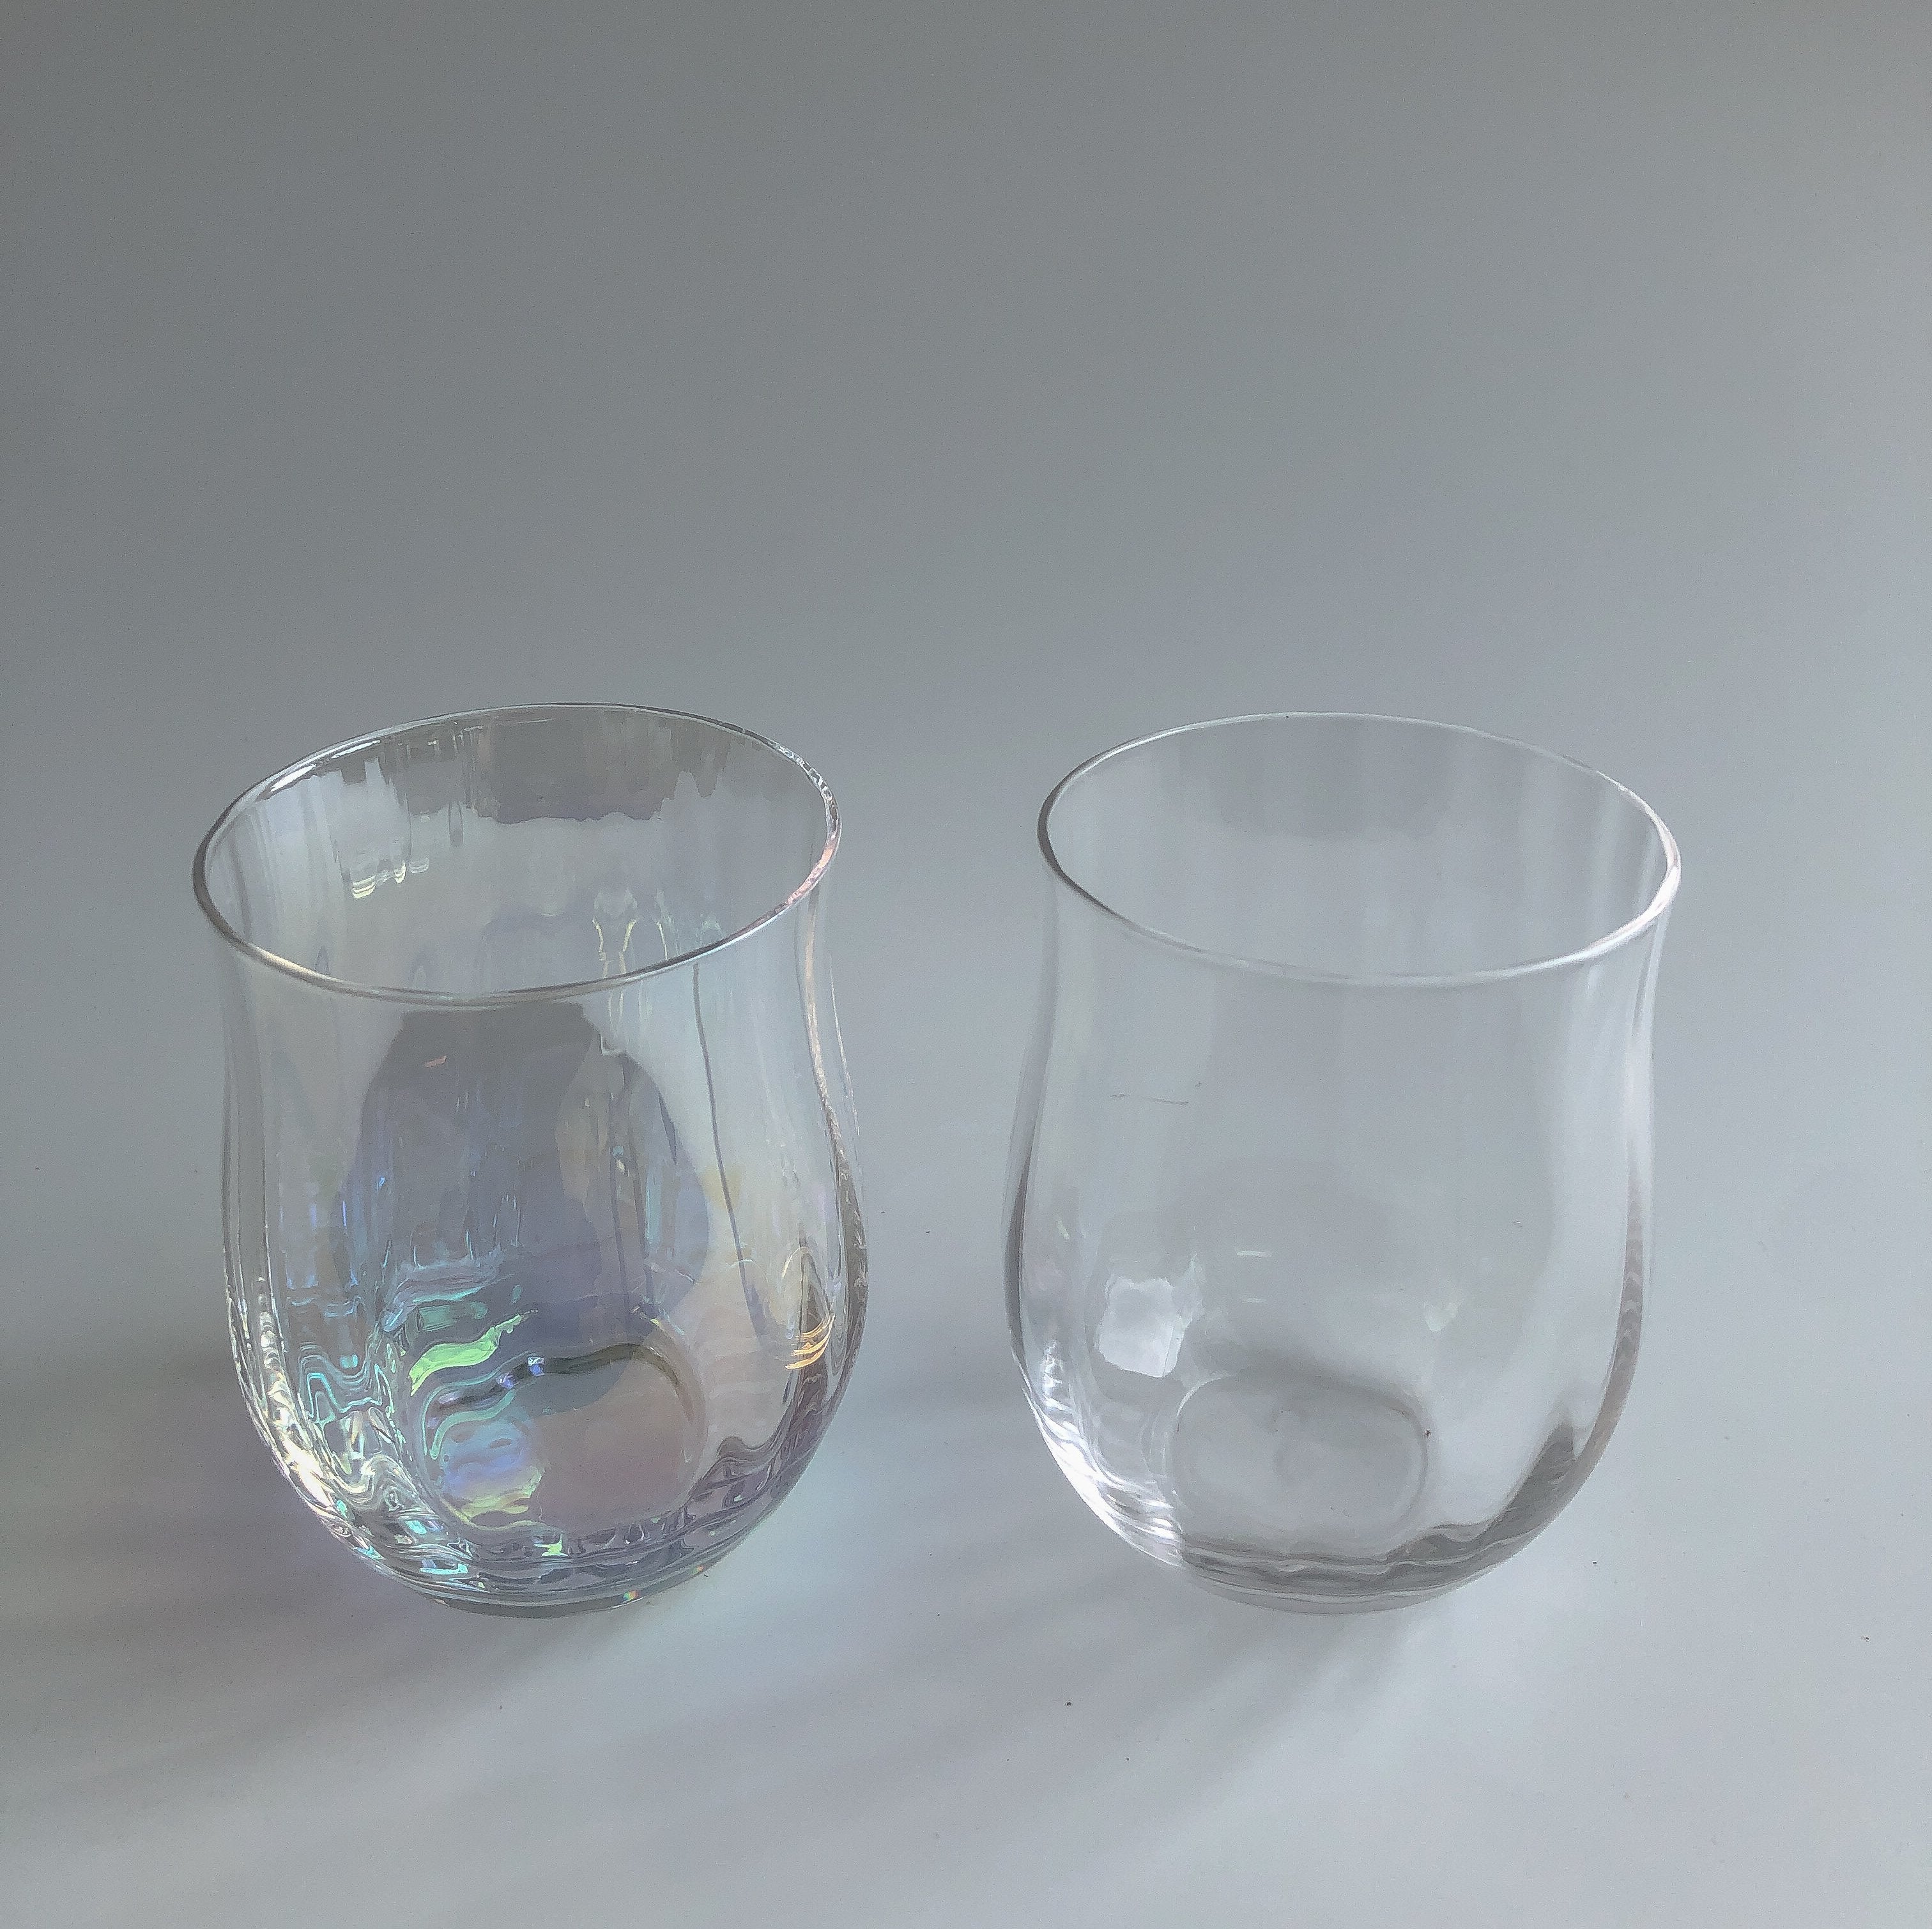 Stemless Wine Glass by PROSE Tabletop